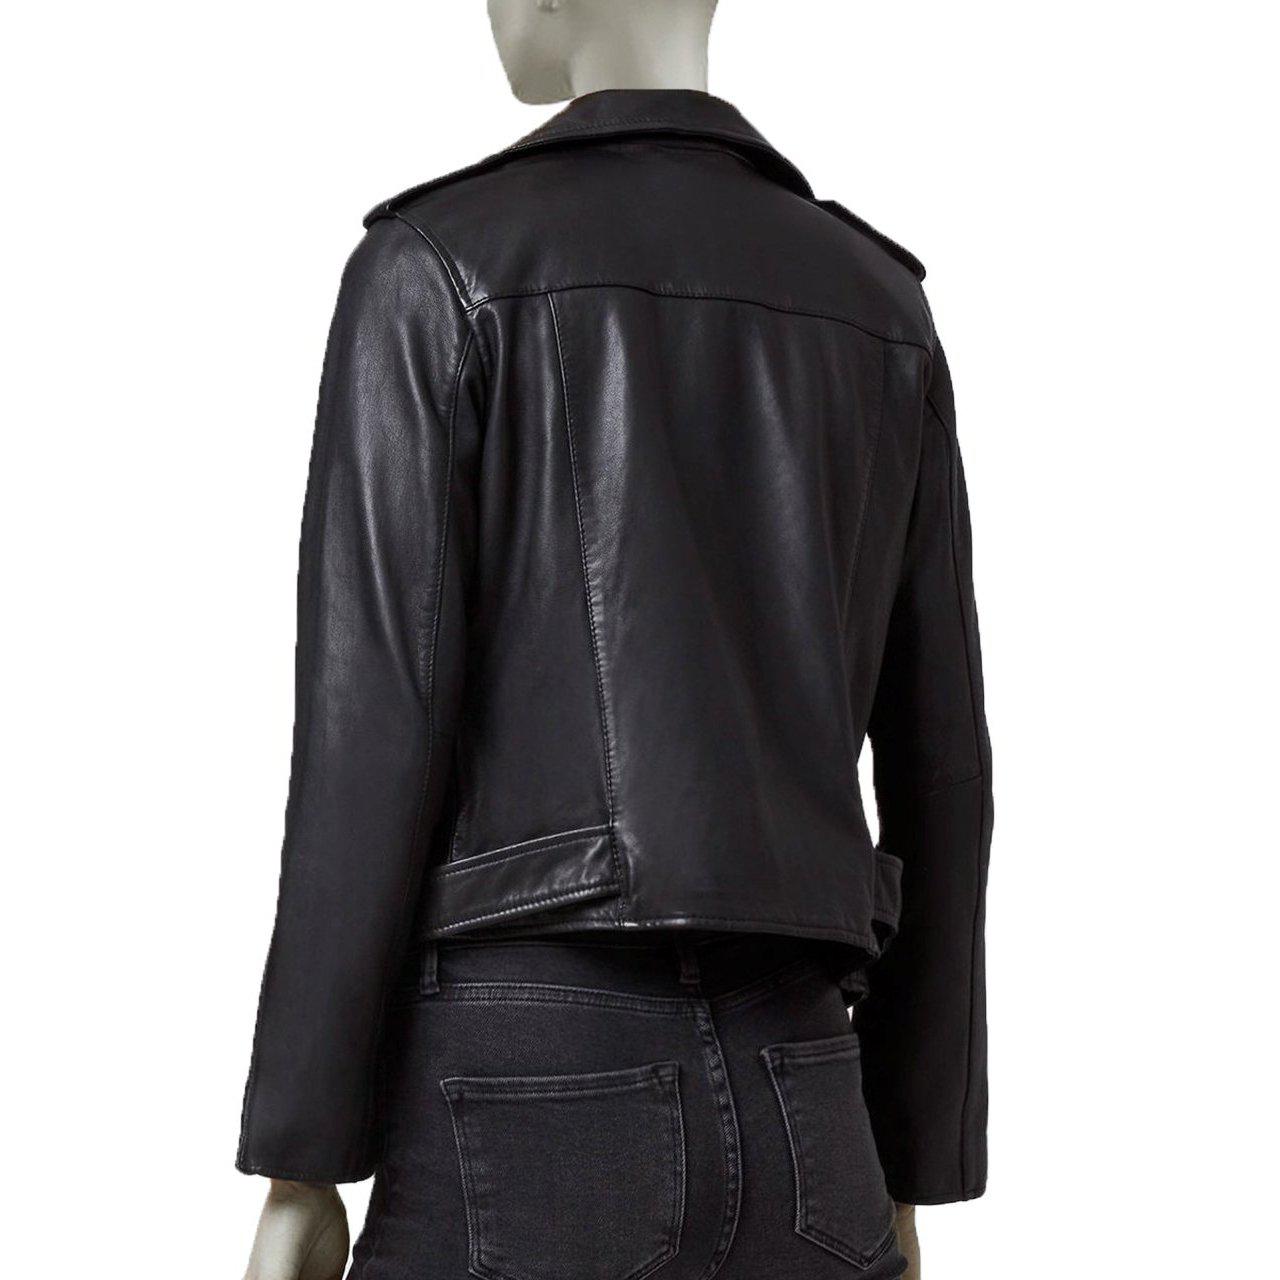 Biker Women Leather Jacket with 3 Front Pockets - Leather Jacket